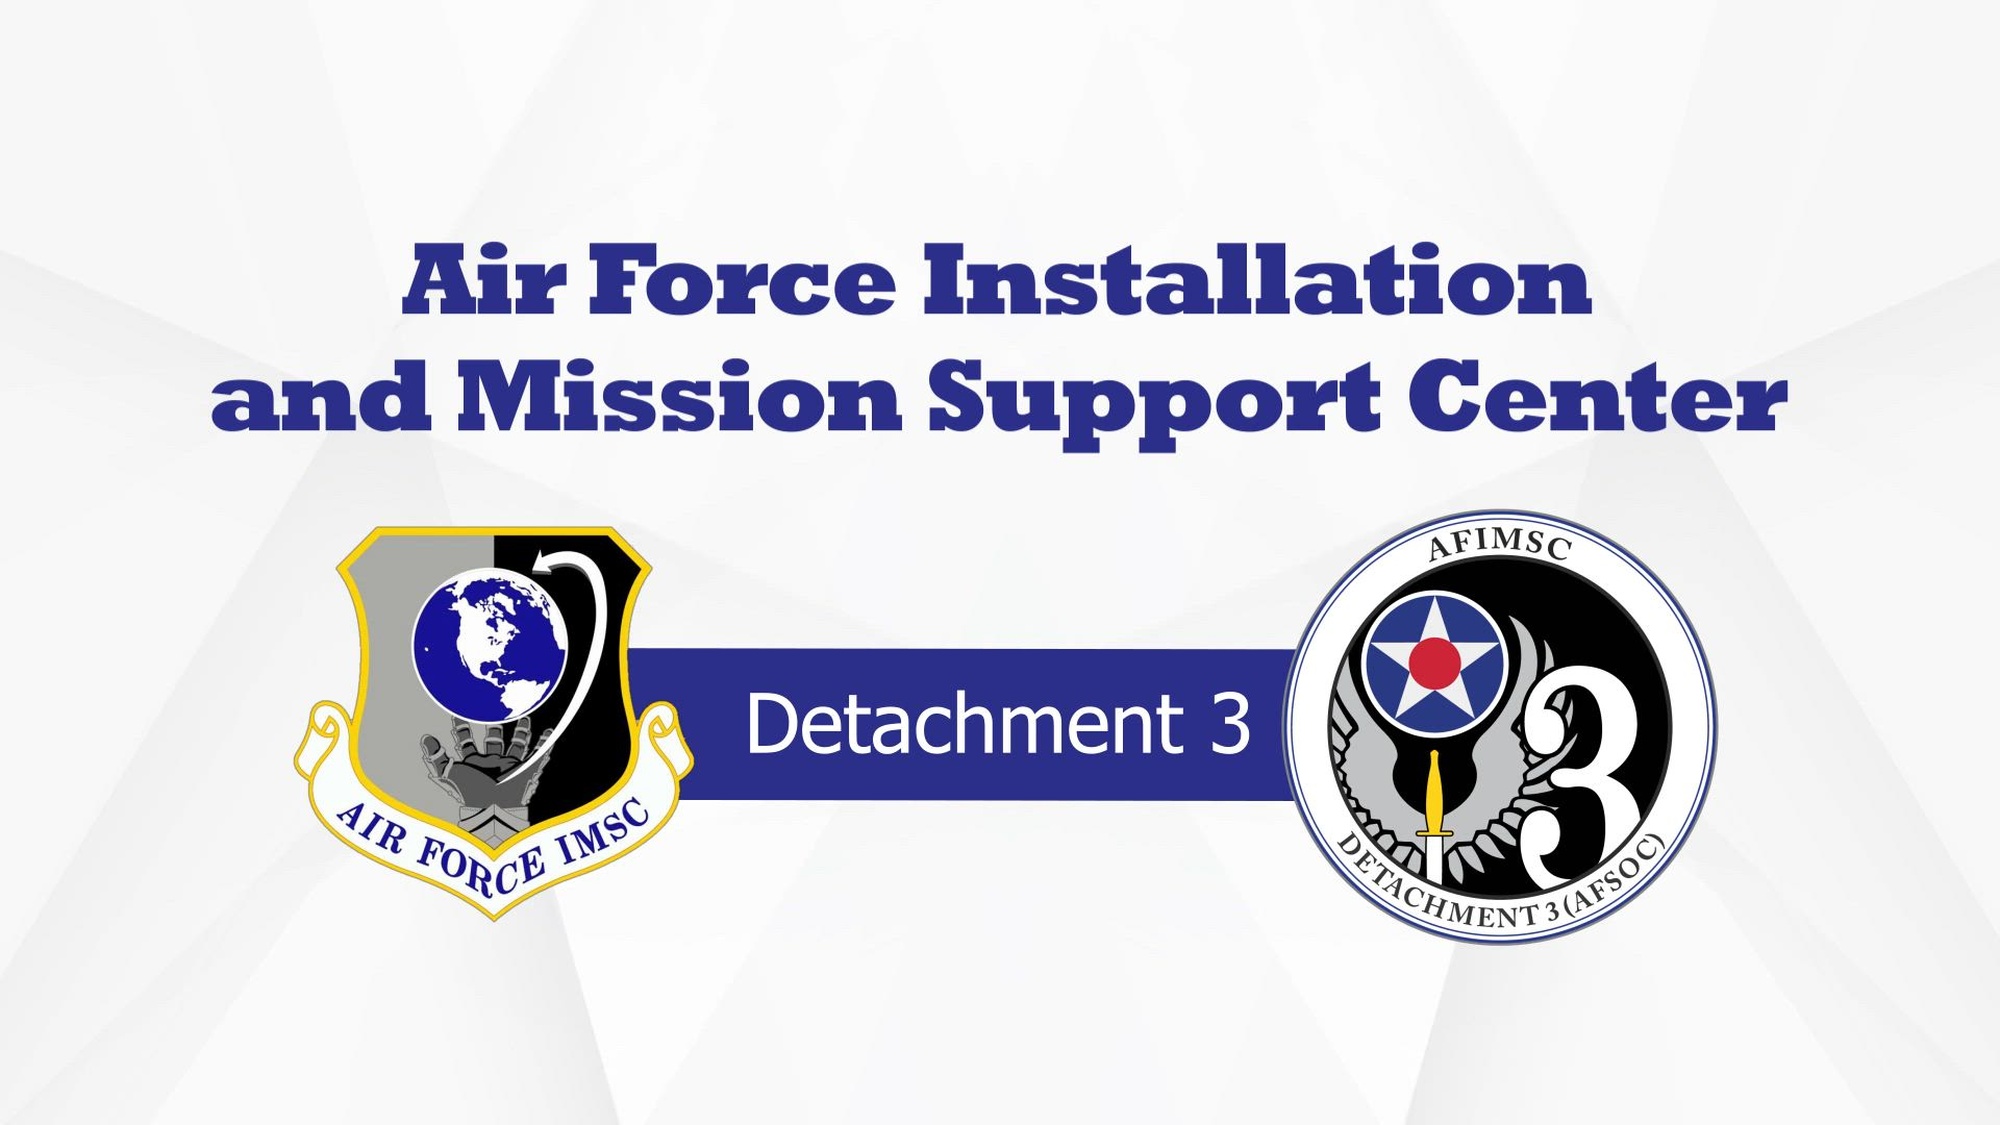 Air Force Installation and Mission Support Center Detachment 3 provides installation and mission support to the United States Air Force Special Operations Command that allows the organization to train, sustain, and project combat-ready special operations forces for 24/7 global contingency response.